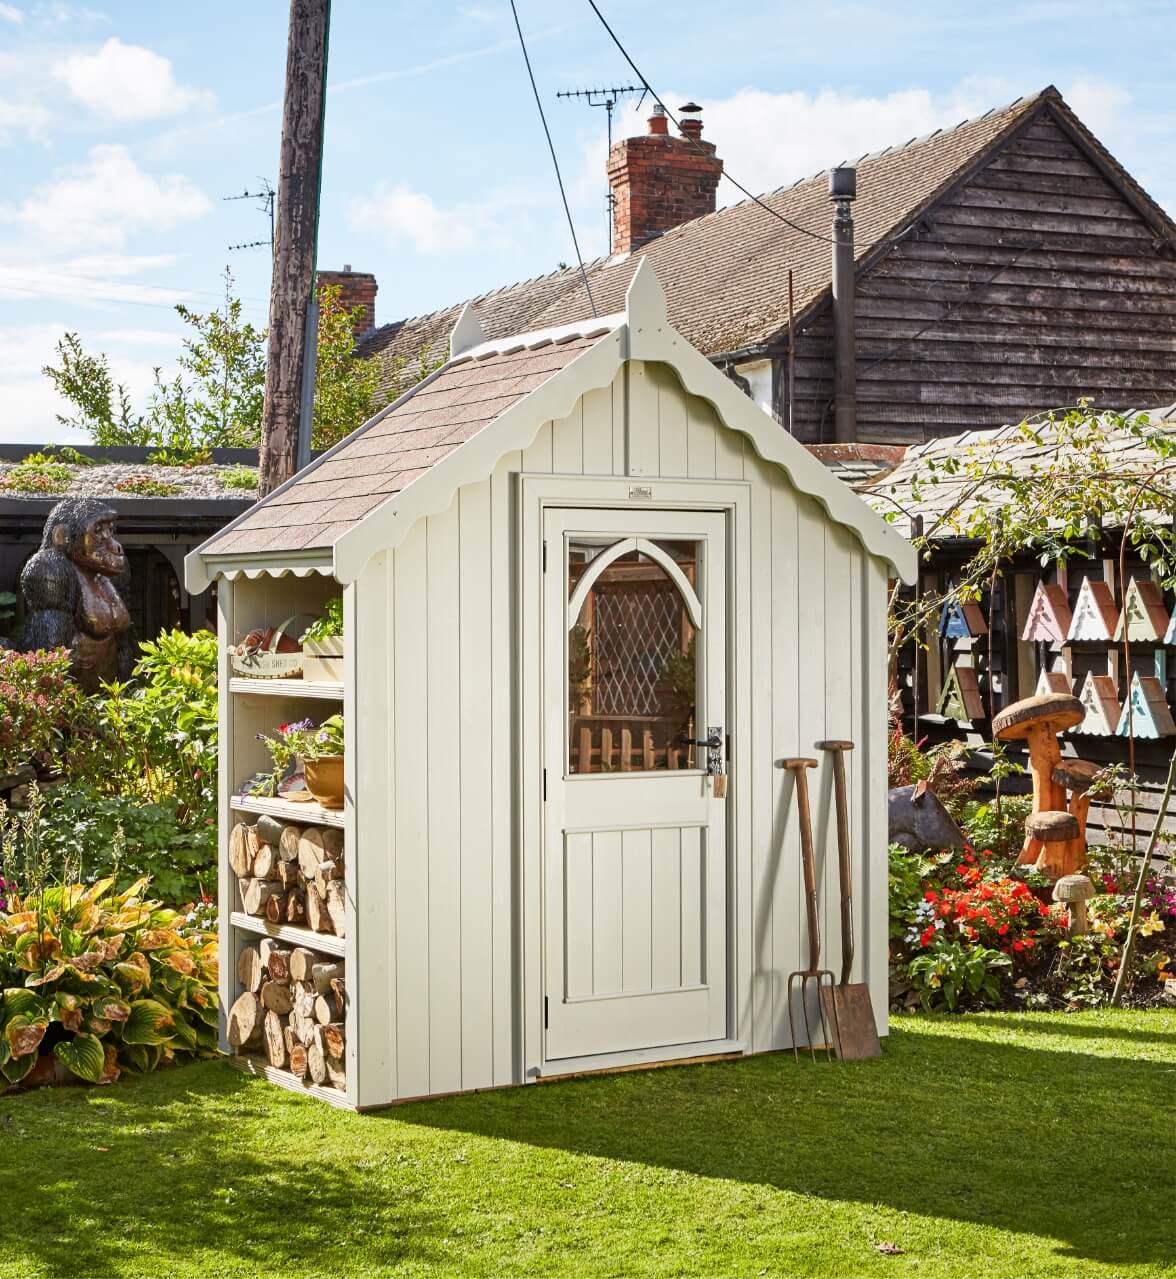 The Chelsea shed finished in Posh Elephant